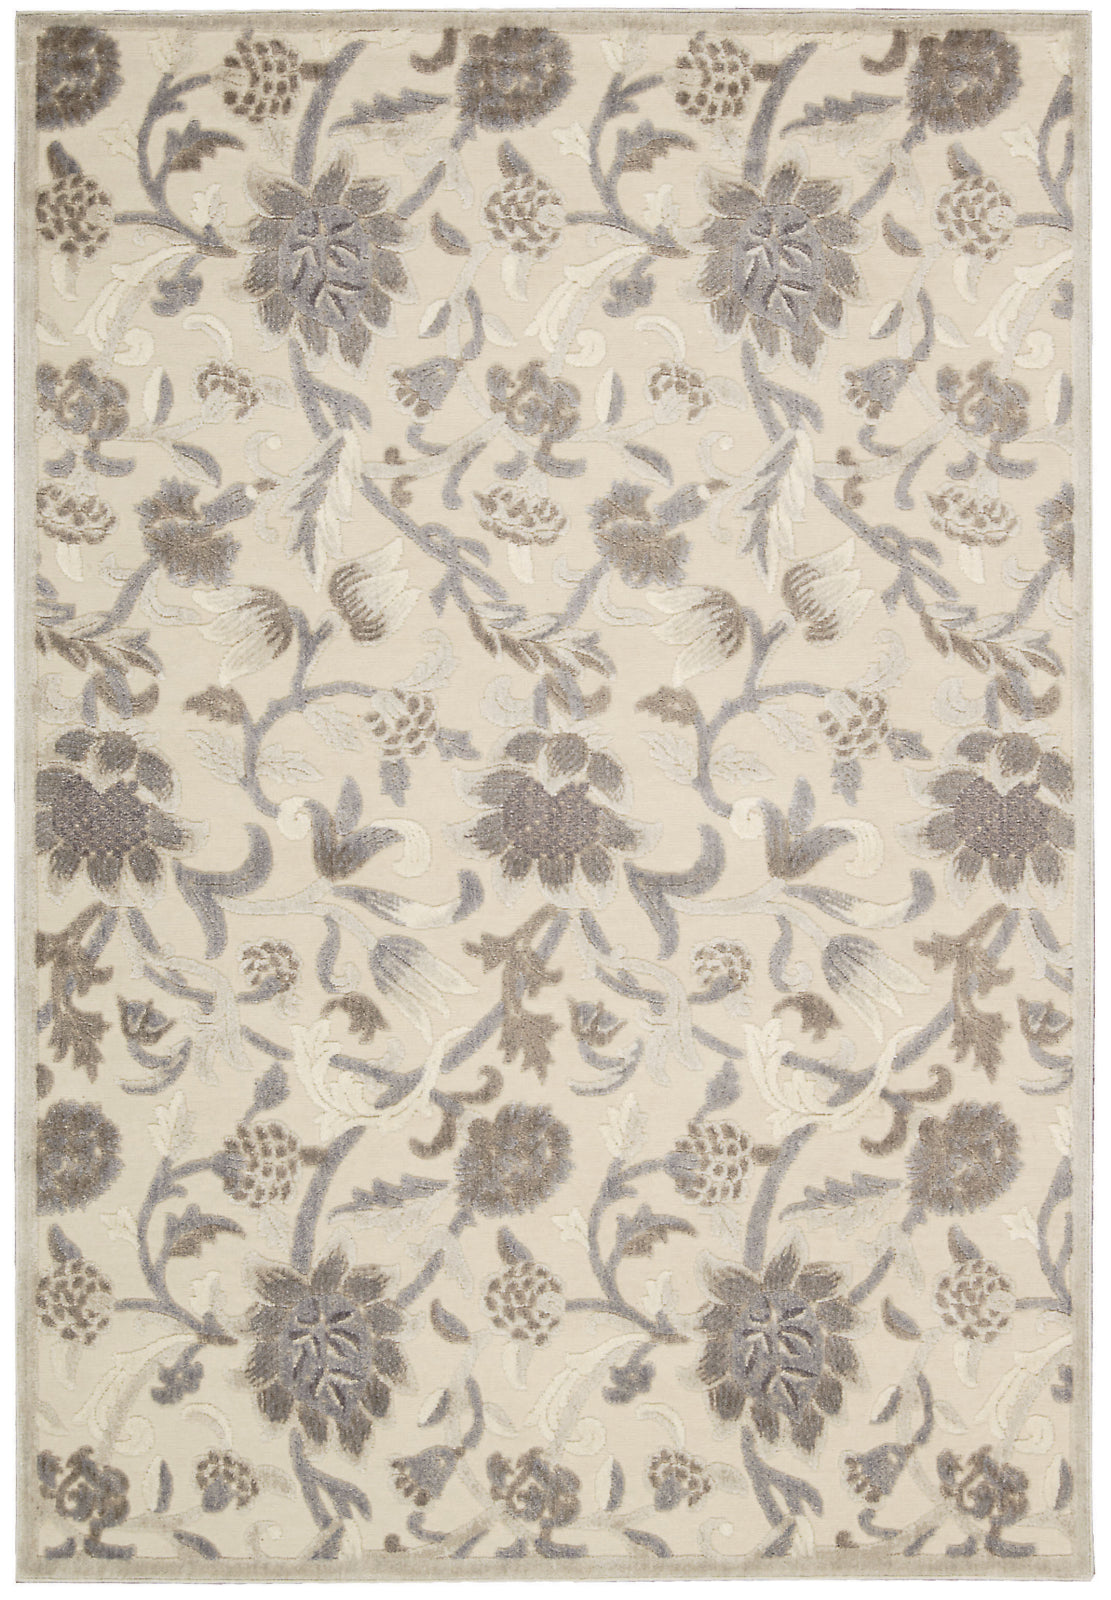 Nourison Graphic Illusions GIL06 Ivory Area Rug main image